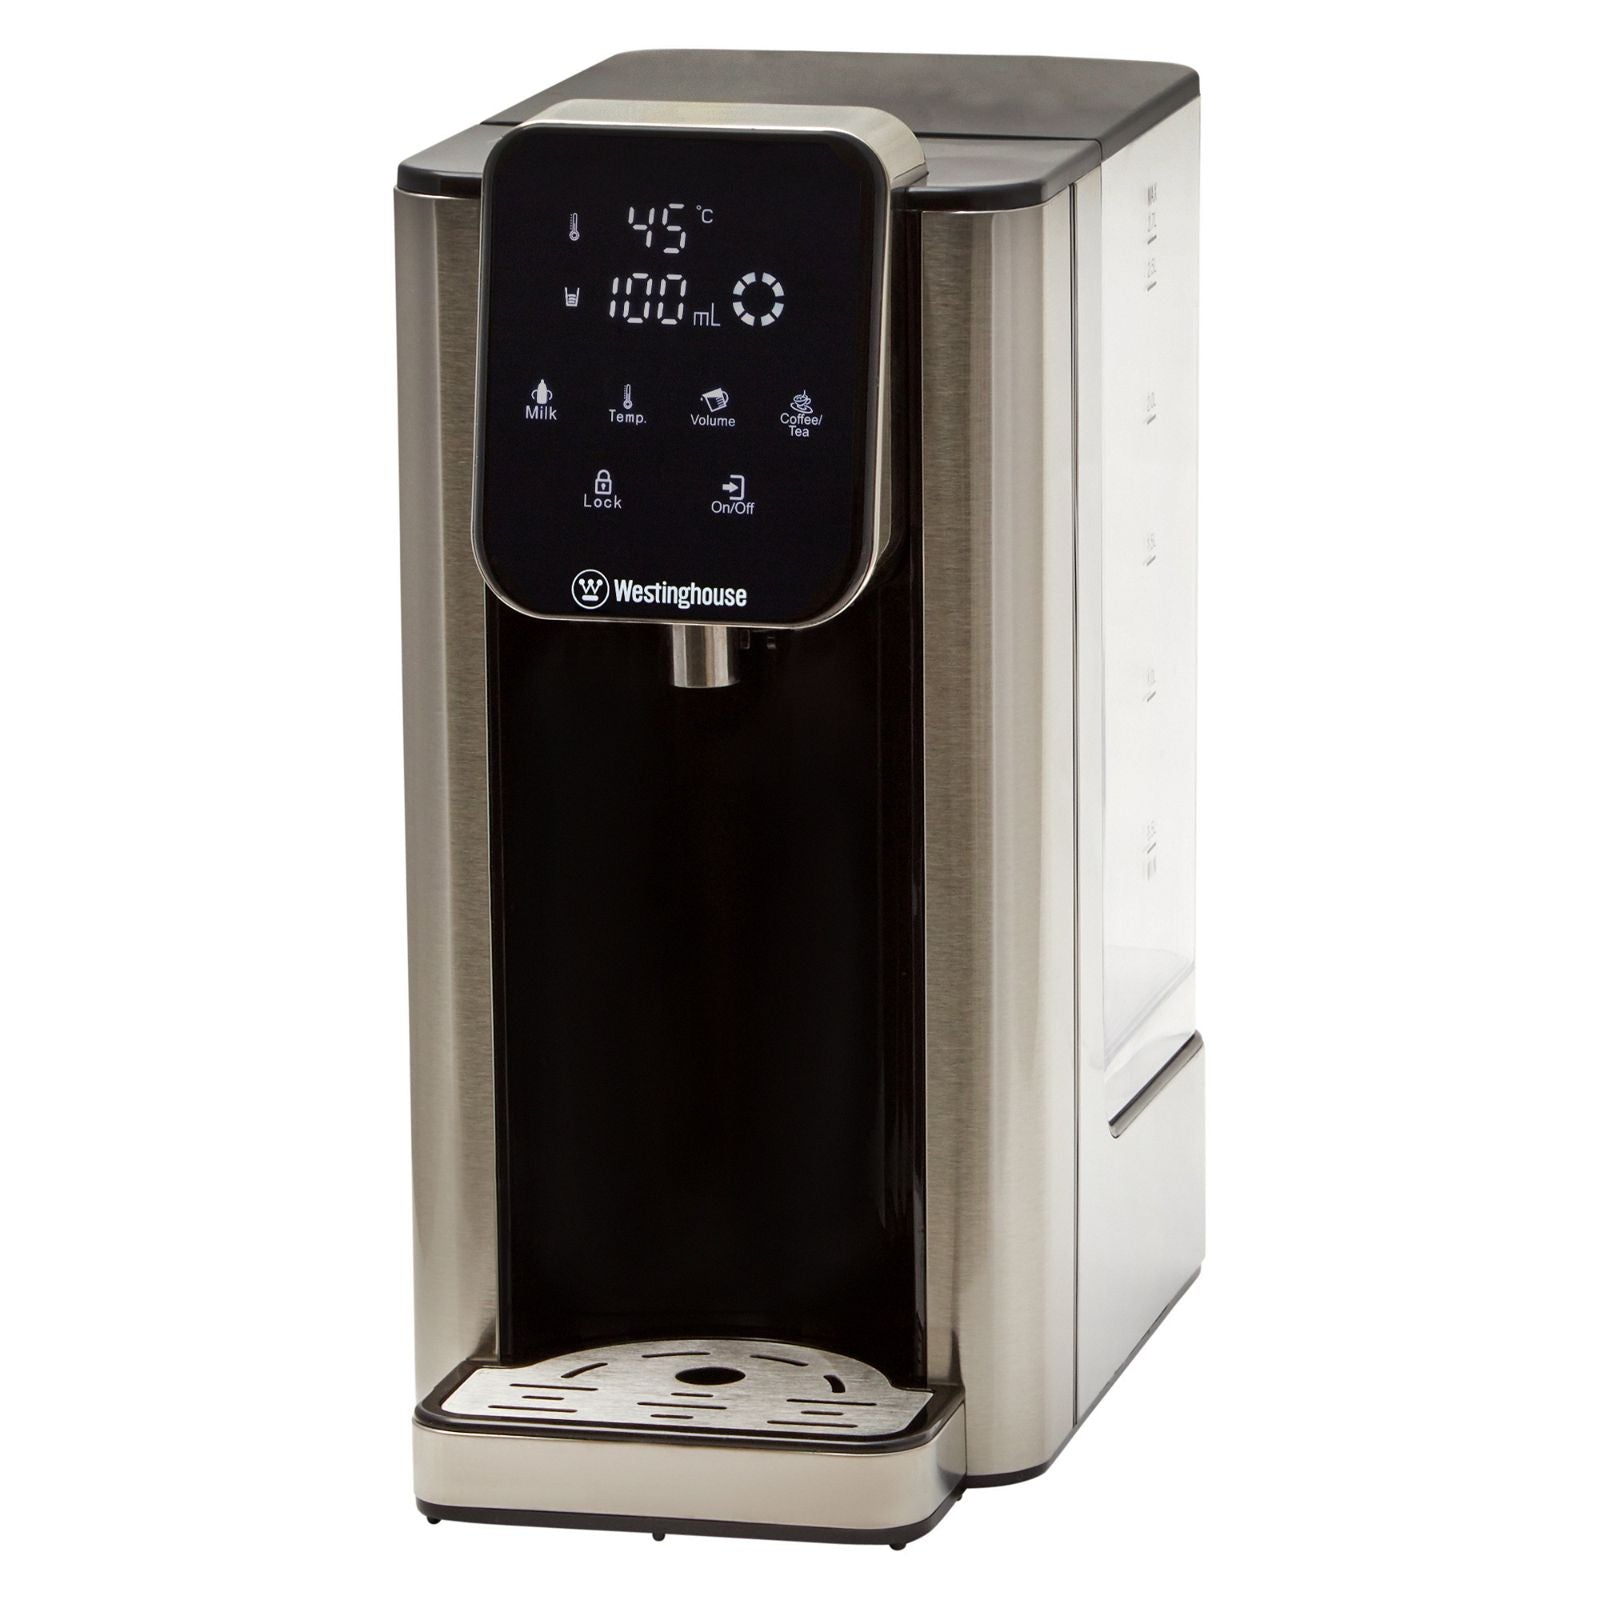 Westinghouse Instant Hot Water Dispenser 2.7L Removable Jug Stainless Steel-#product_category#- Distributed by:  under license